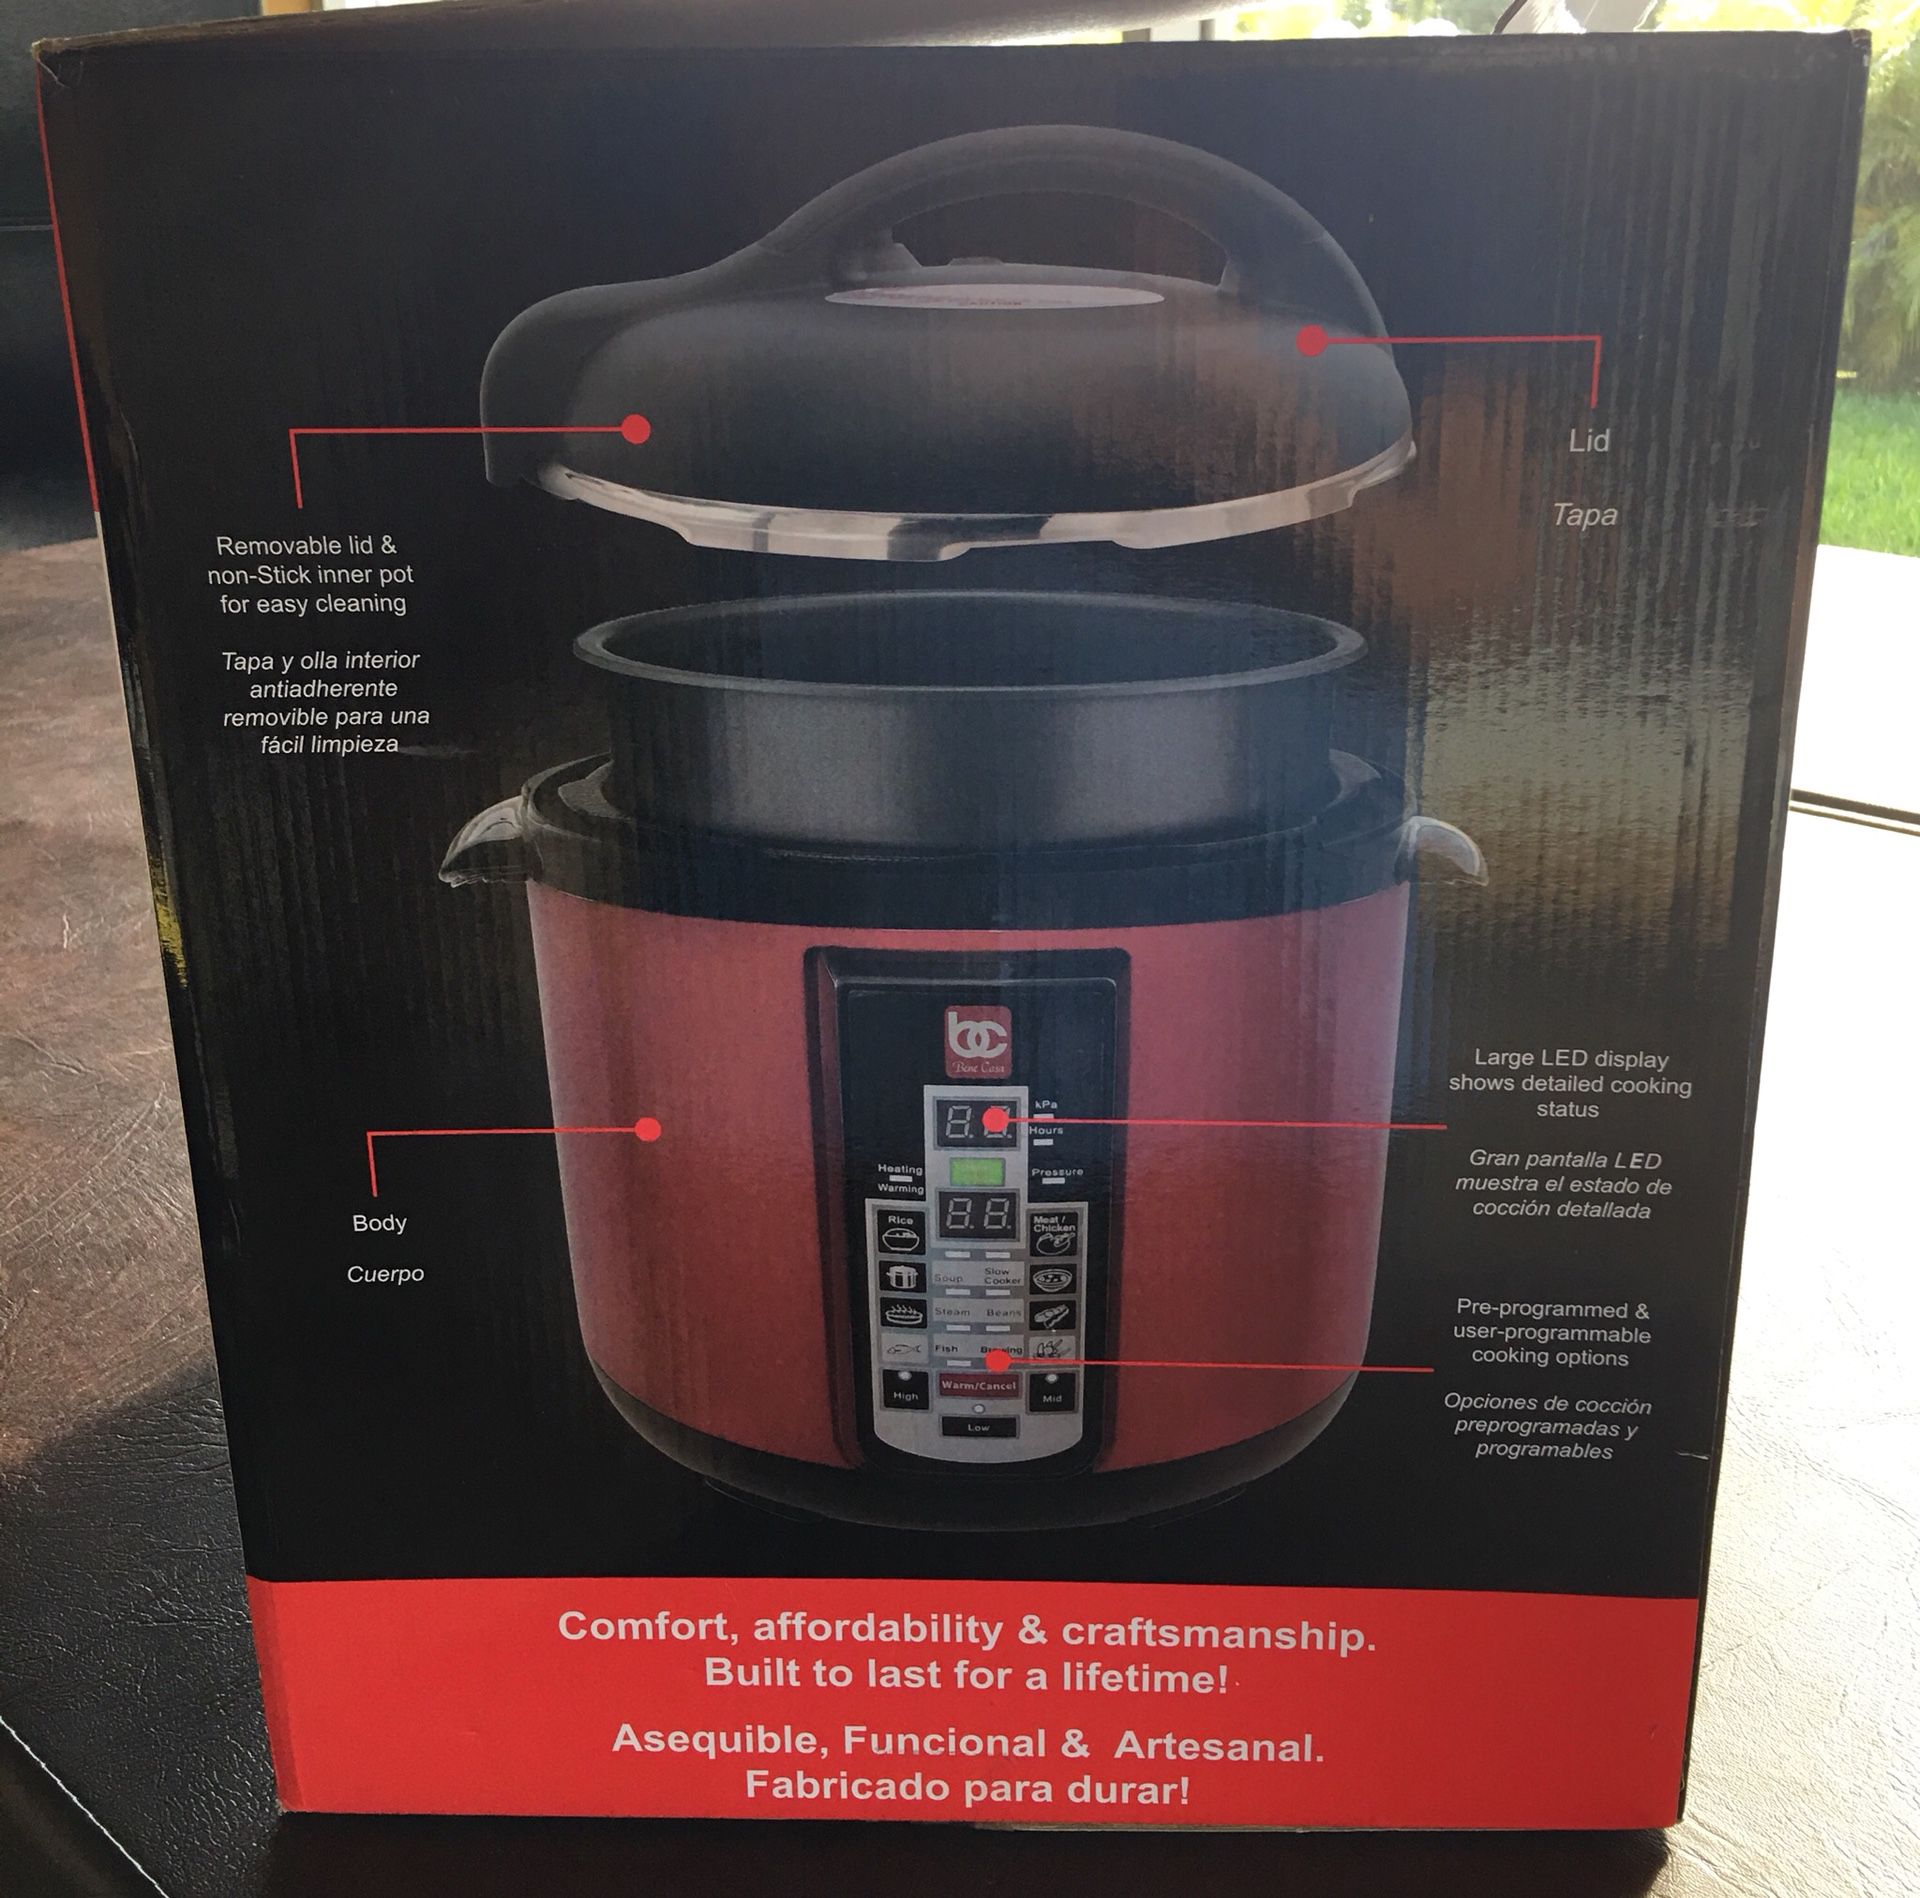 CHEF IQ MULTIFUNCTIONAL SMART PRESSURE COOKER for Sale in Lynn, MA - OfferUp